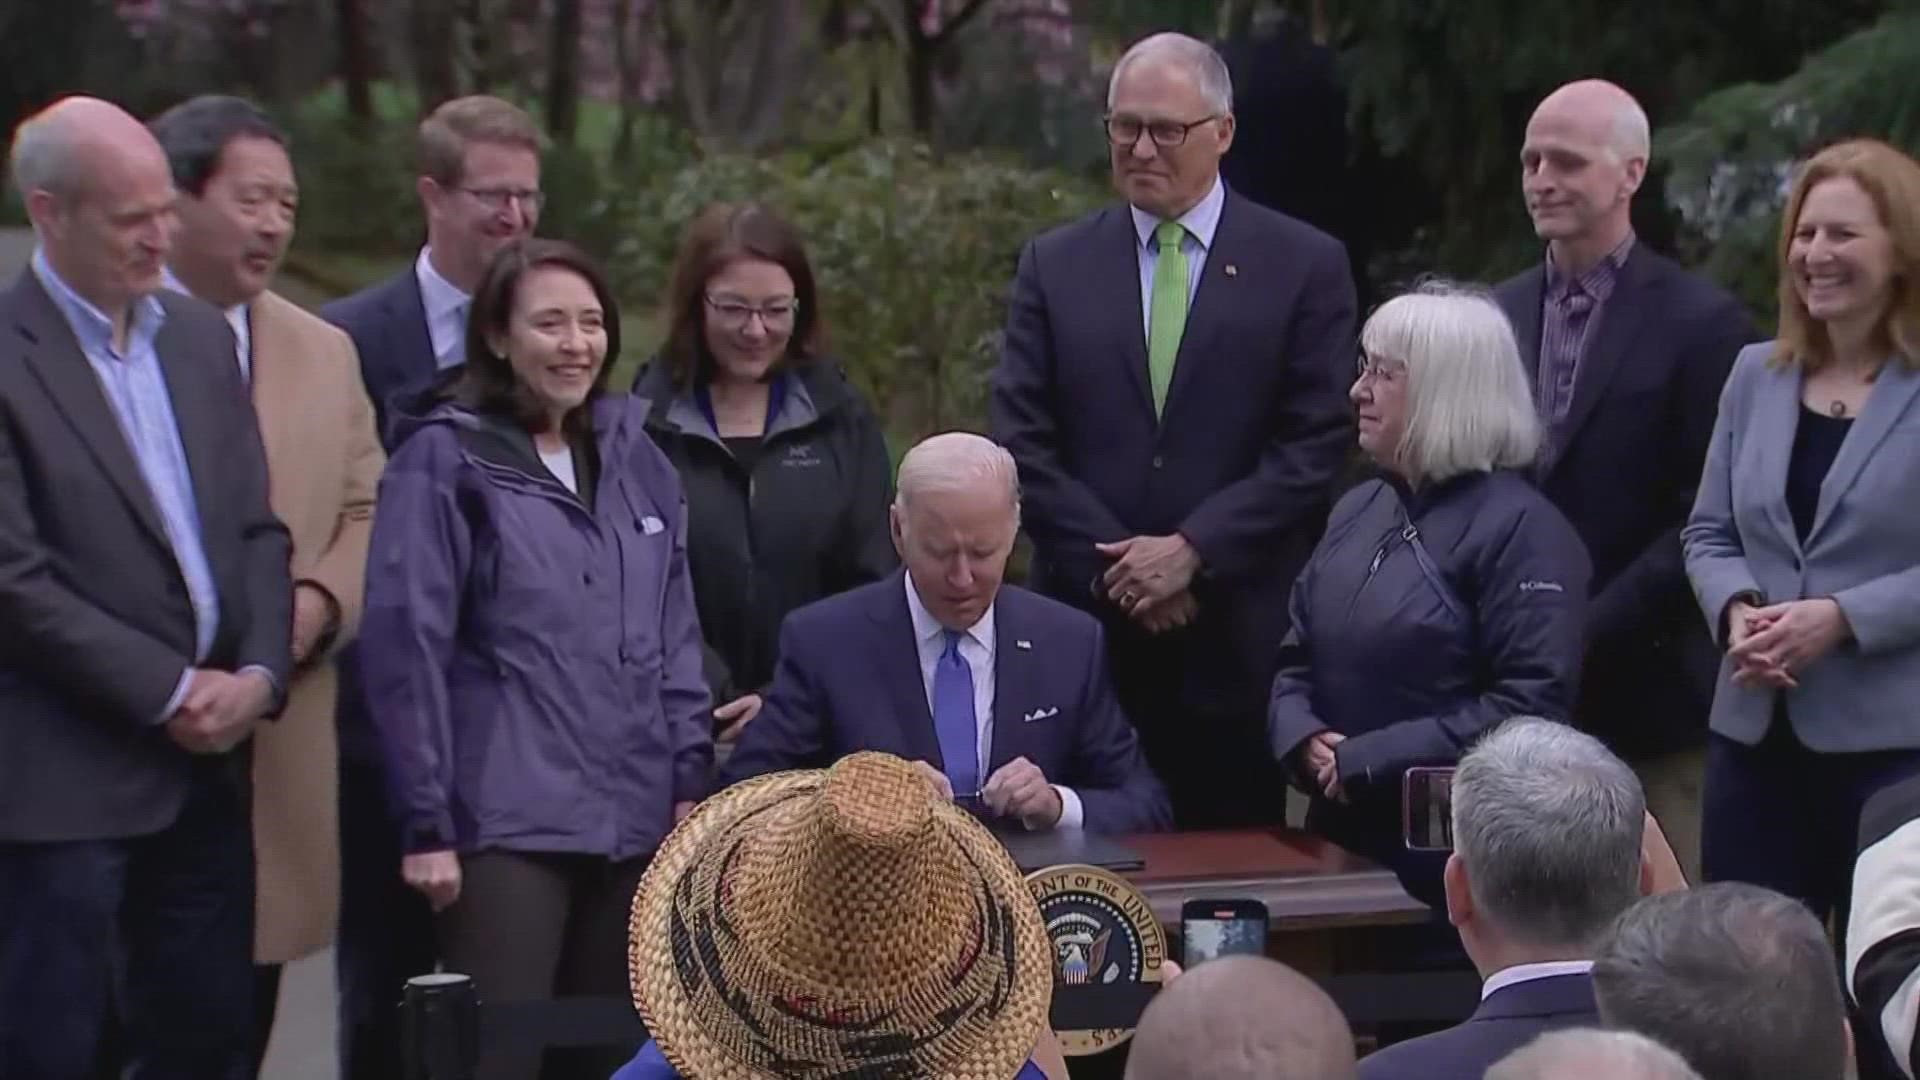 The president spoke in Seattle's Seward Park about his future plans for the environment and signed an executive order to protect old growth forests